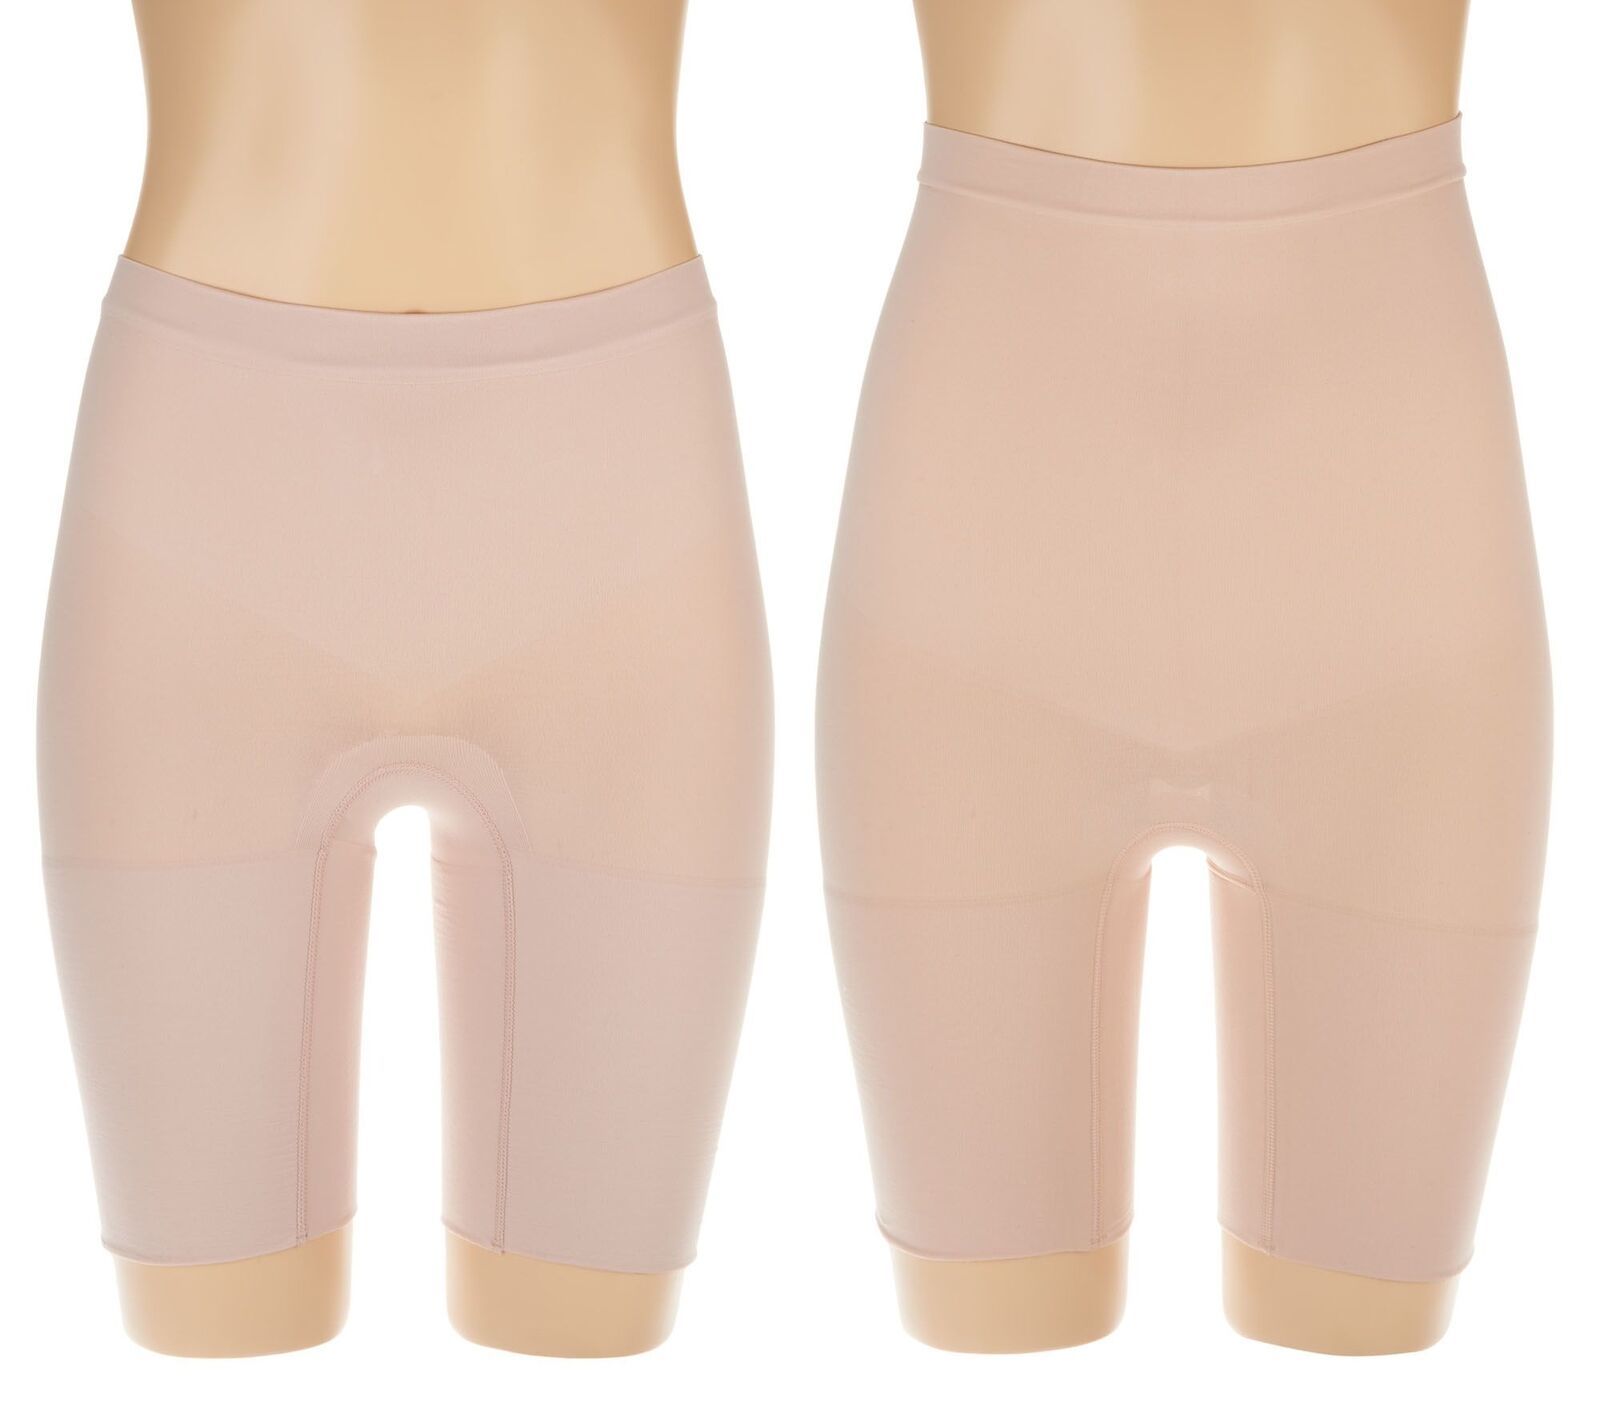 Primary image for Spanx Power Series Shaping Short Set of 2 Power Shorts and Higher Power Shorts